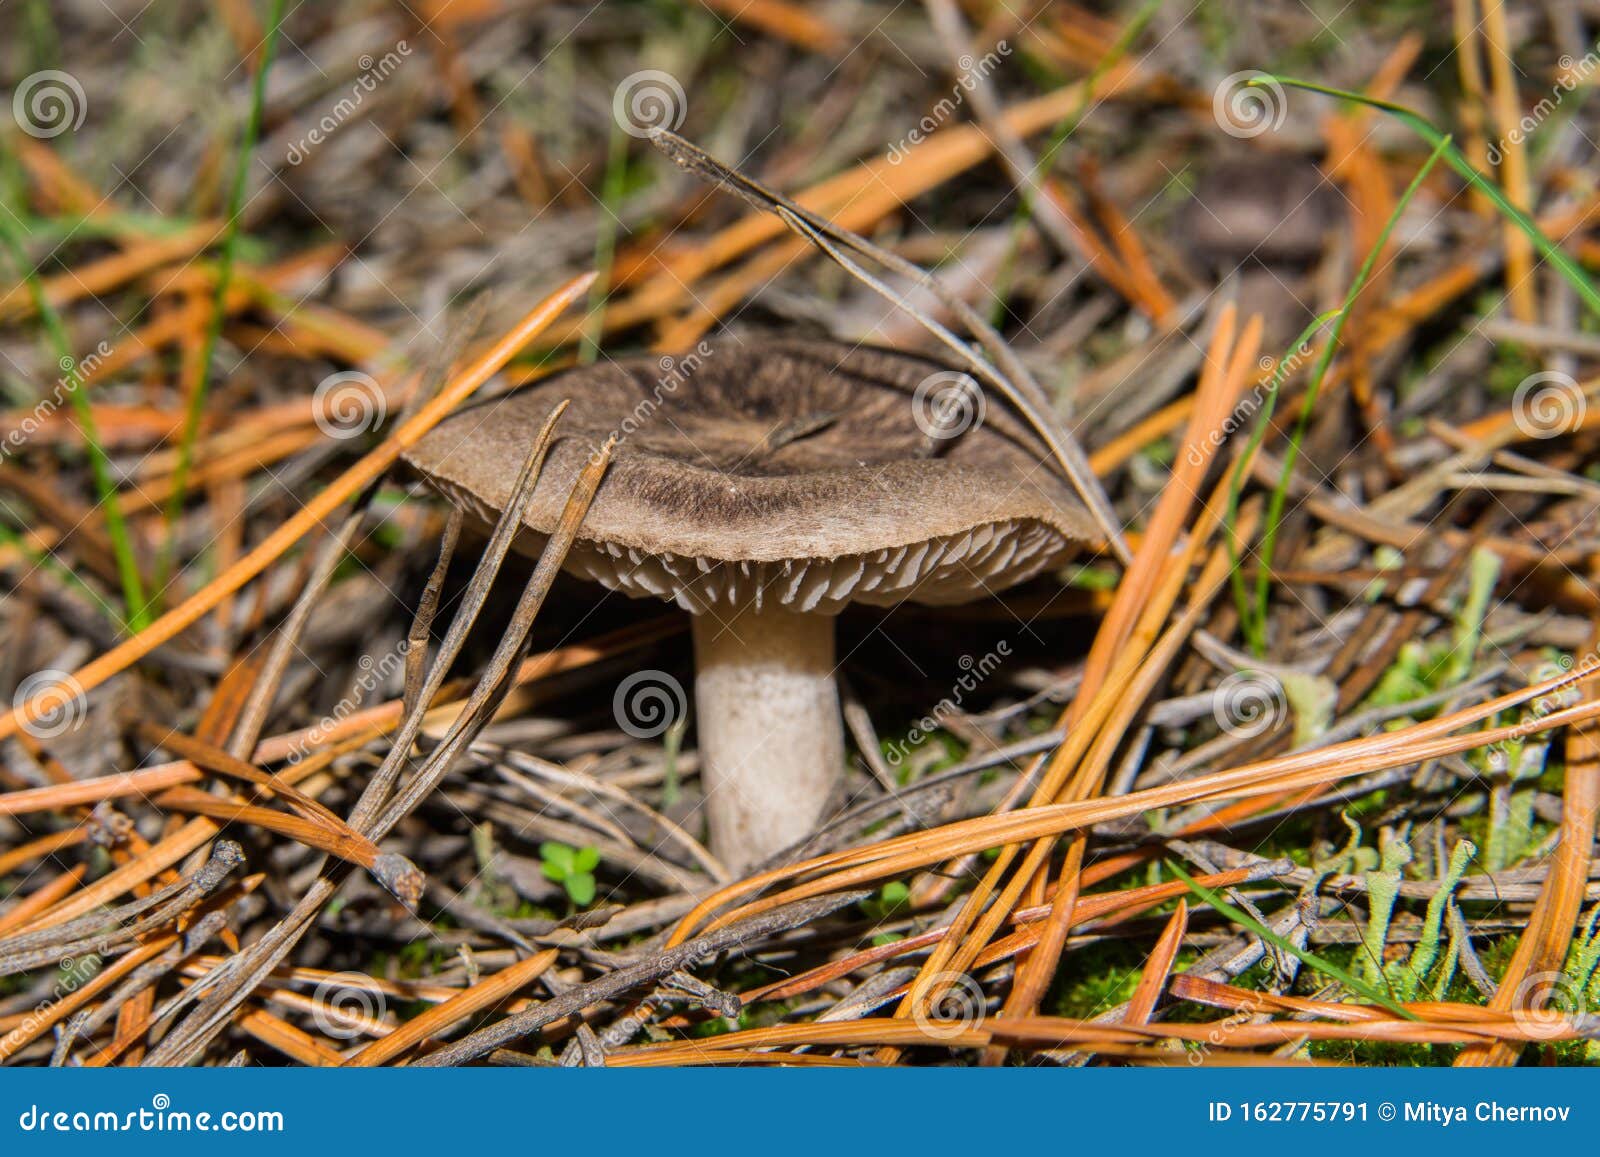 the fungus tricholoma triste grows in a pine forest. mushroom close-up. selective focus.